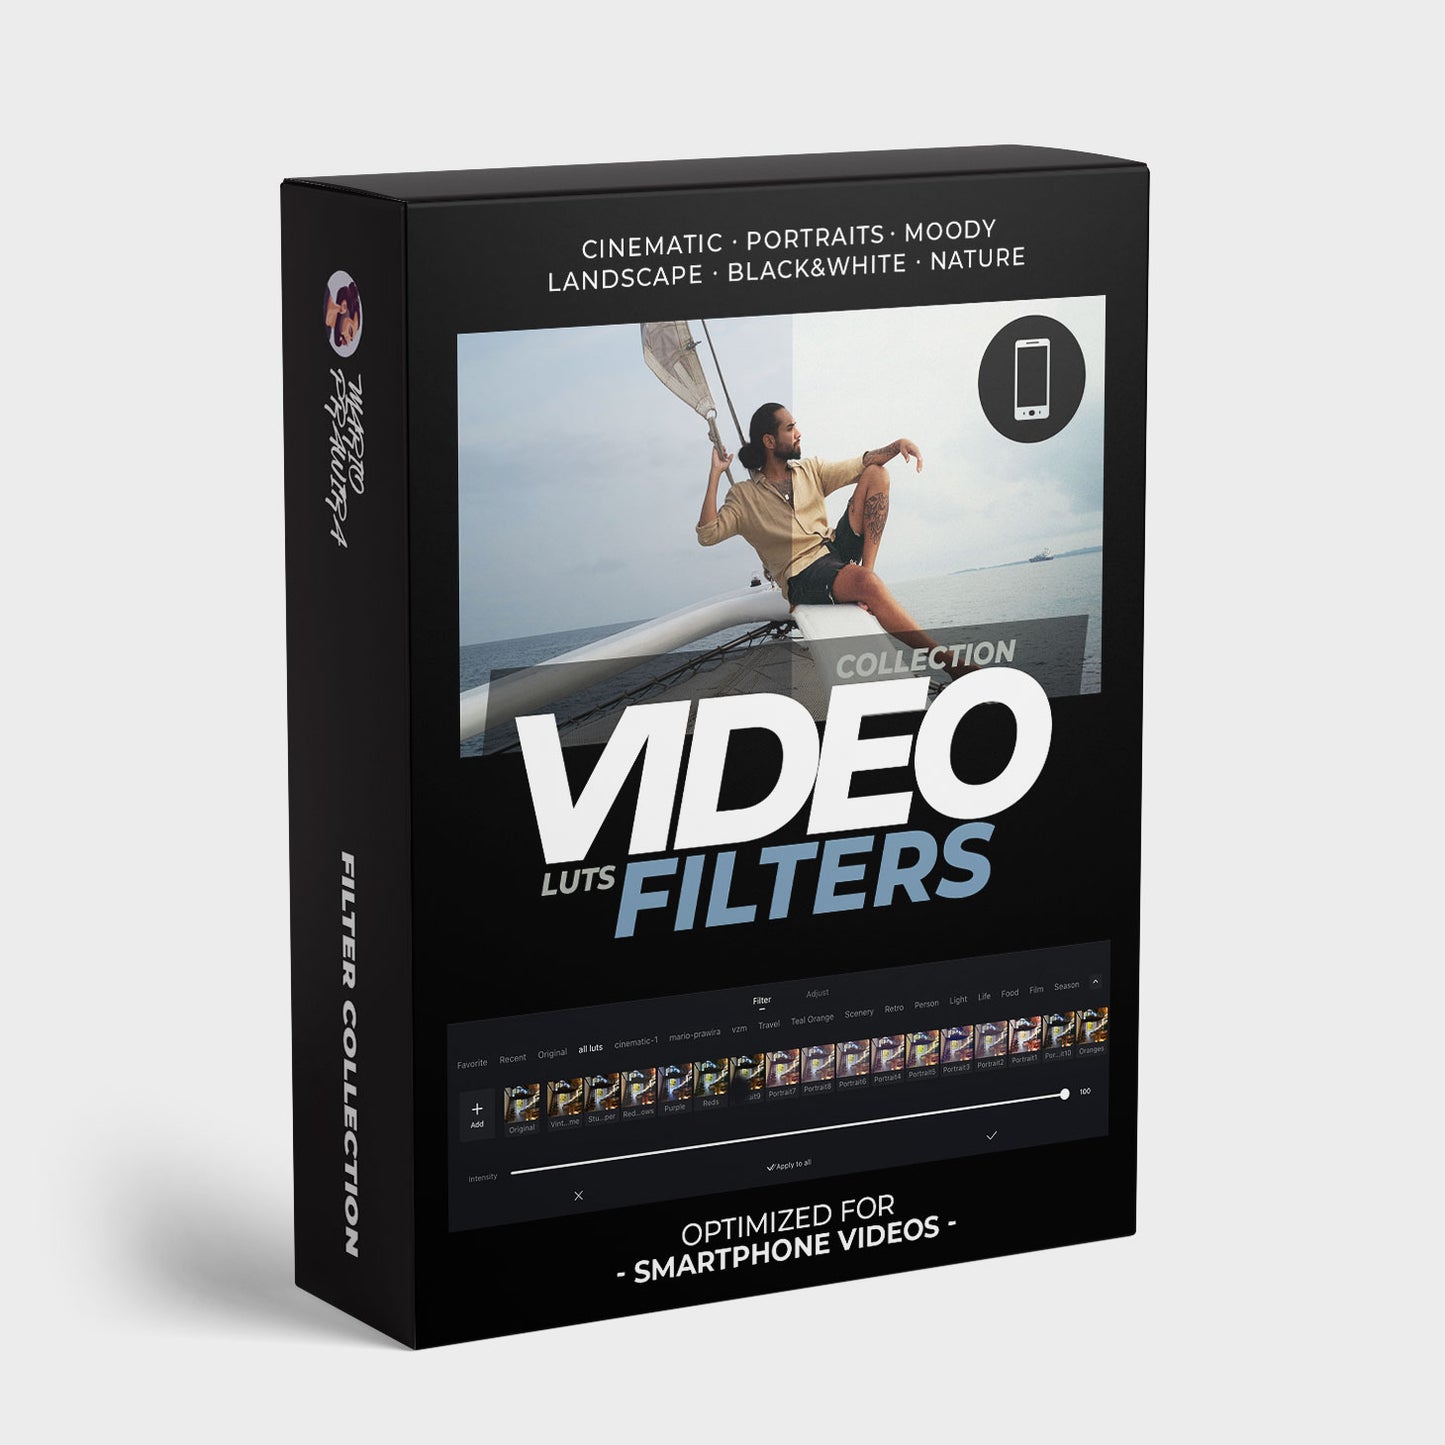 Video Filters (LUTs)